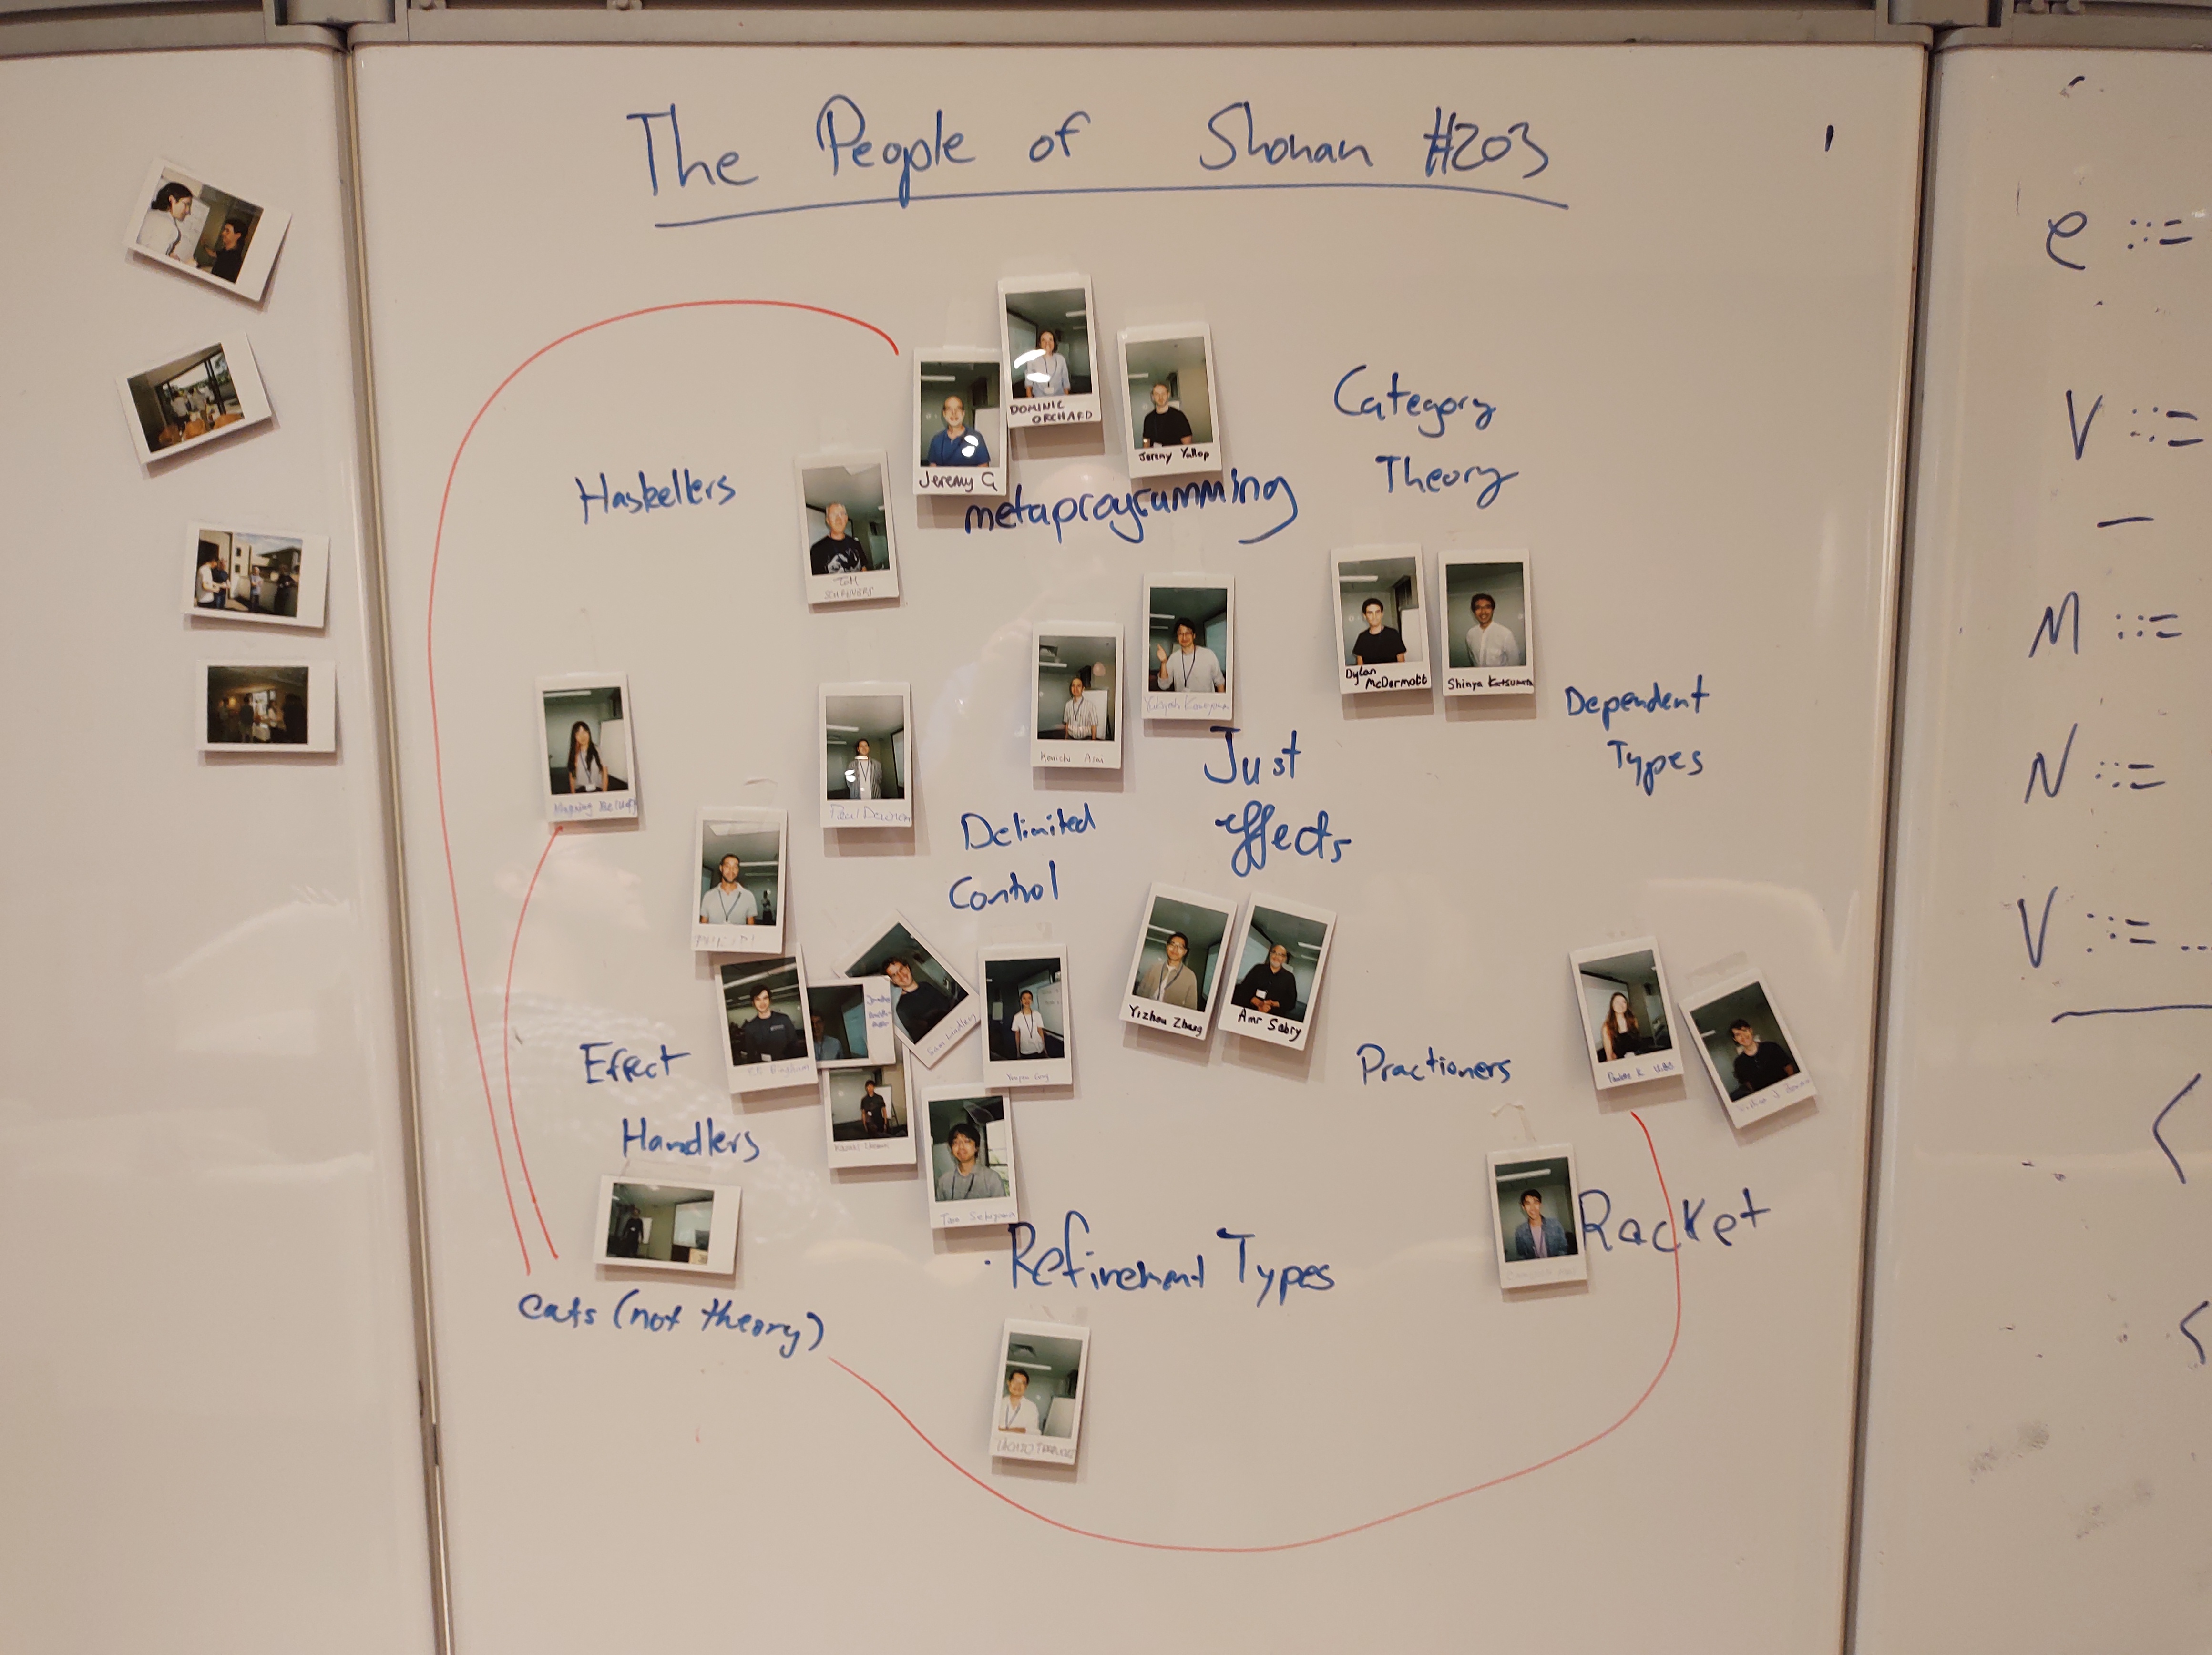 Polaroid photos of participants, arranged by specialism